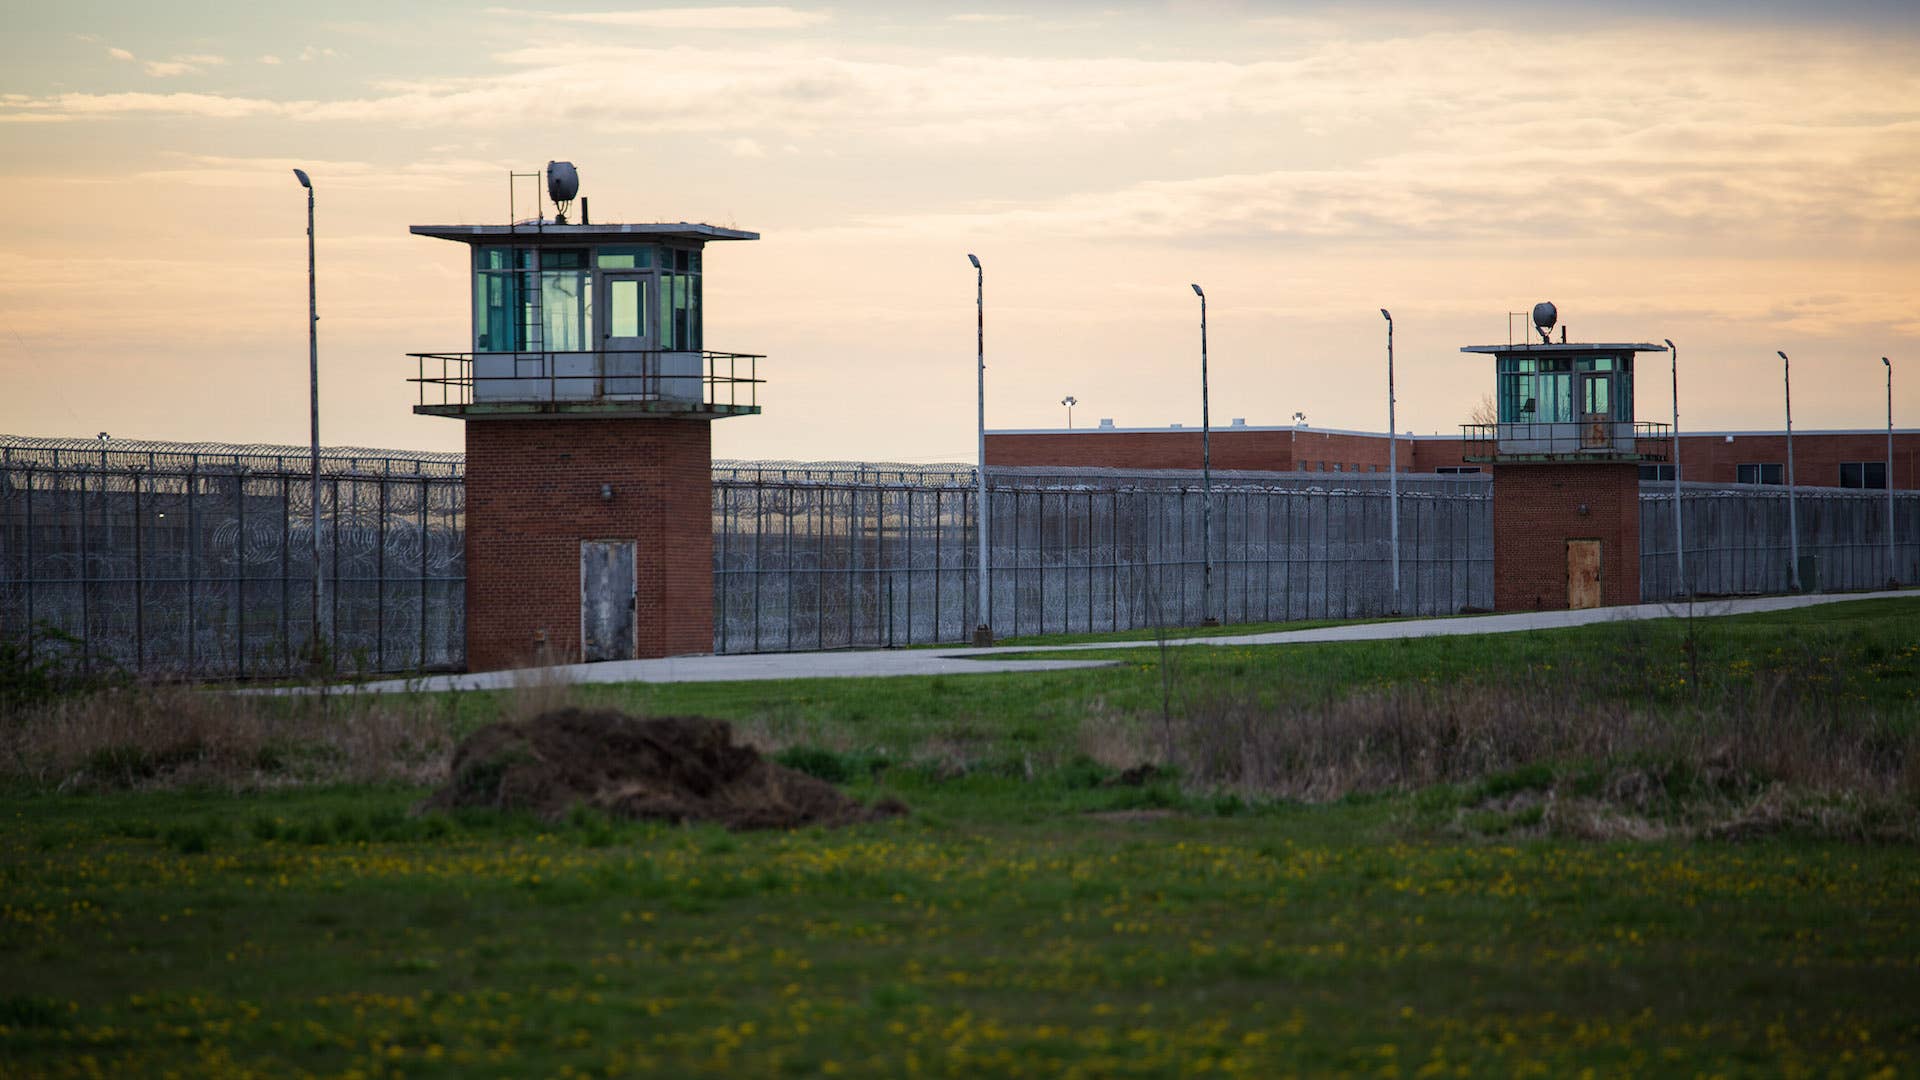 Guard towers look over the prison courtyard